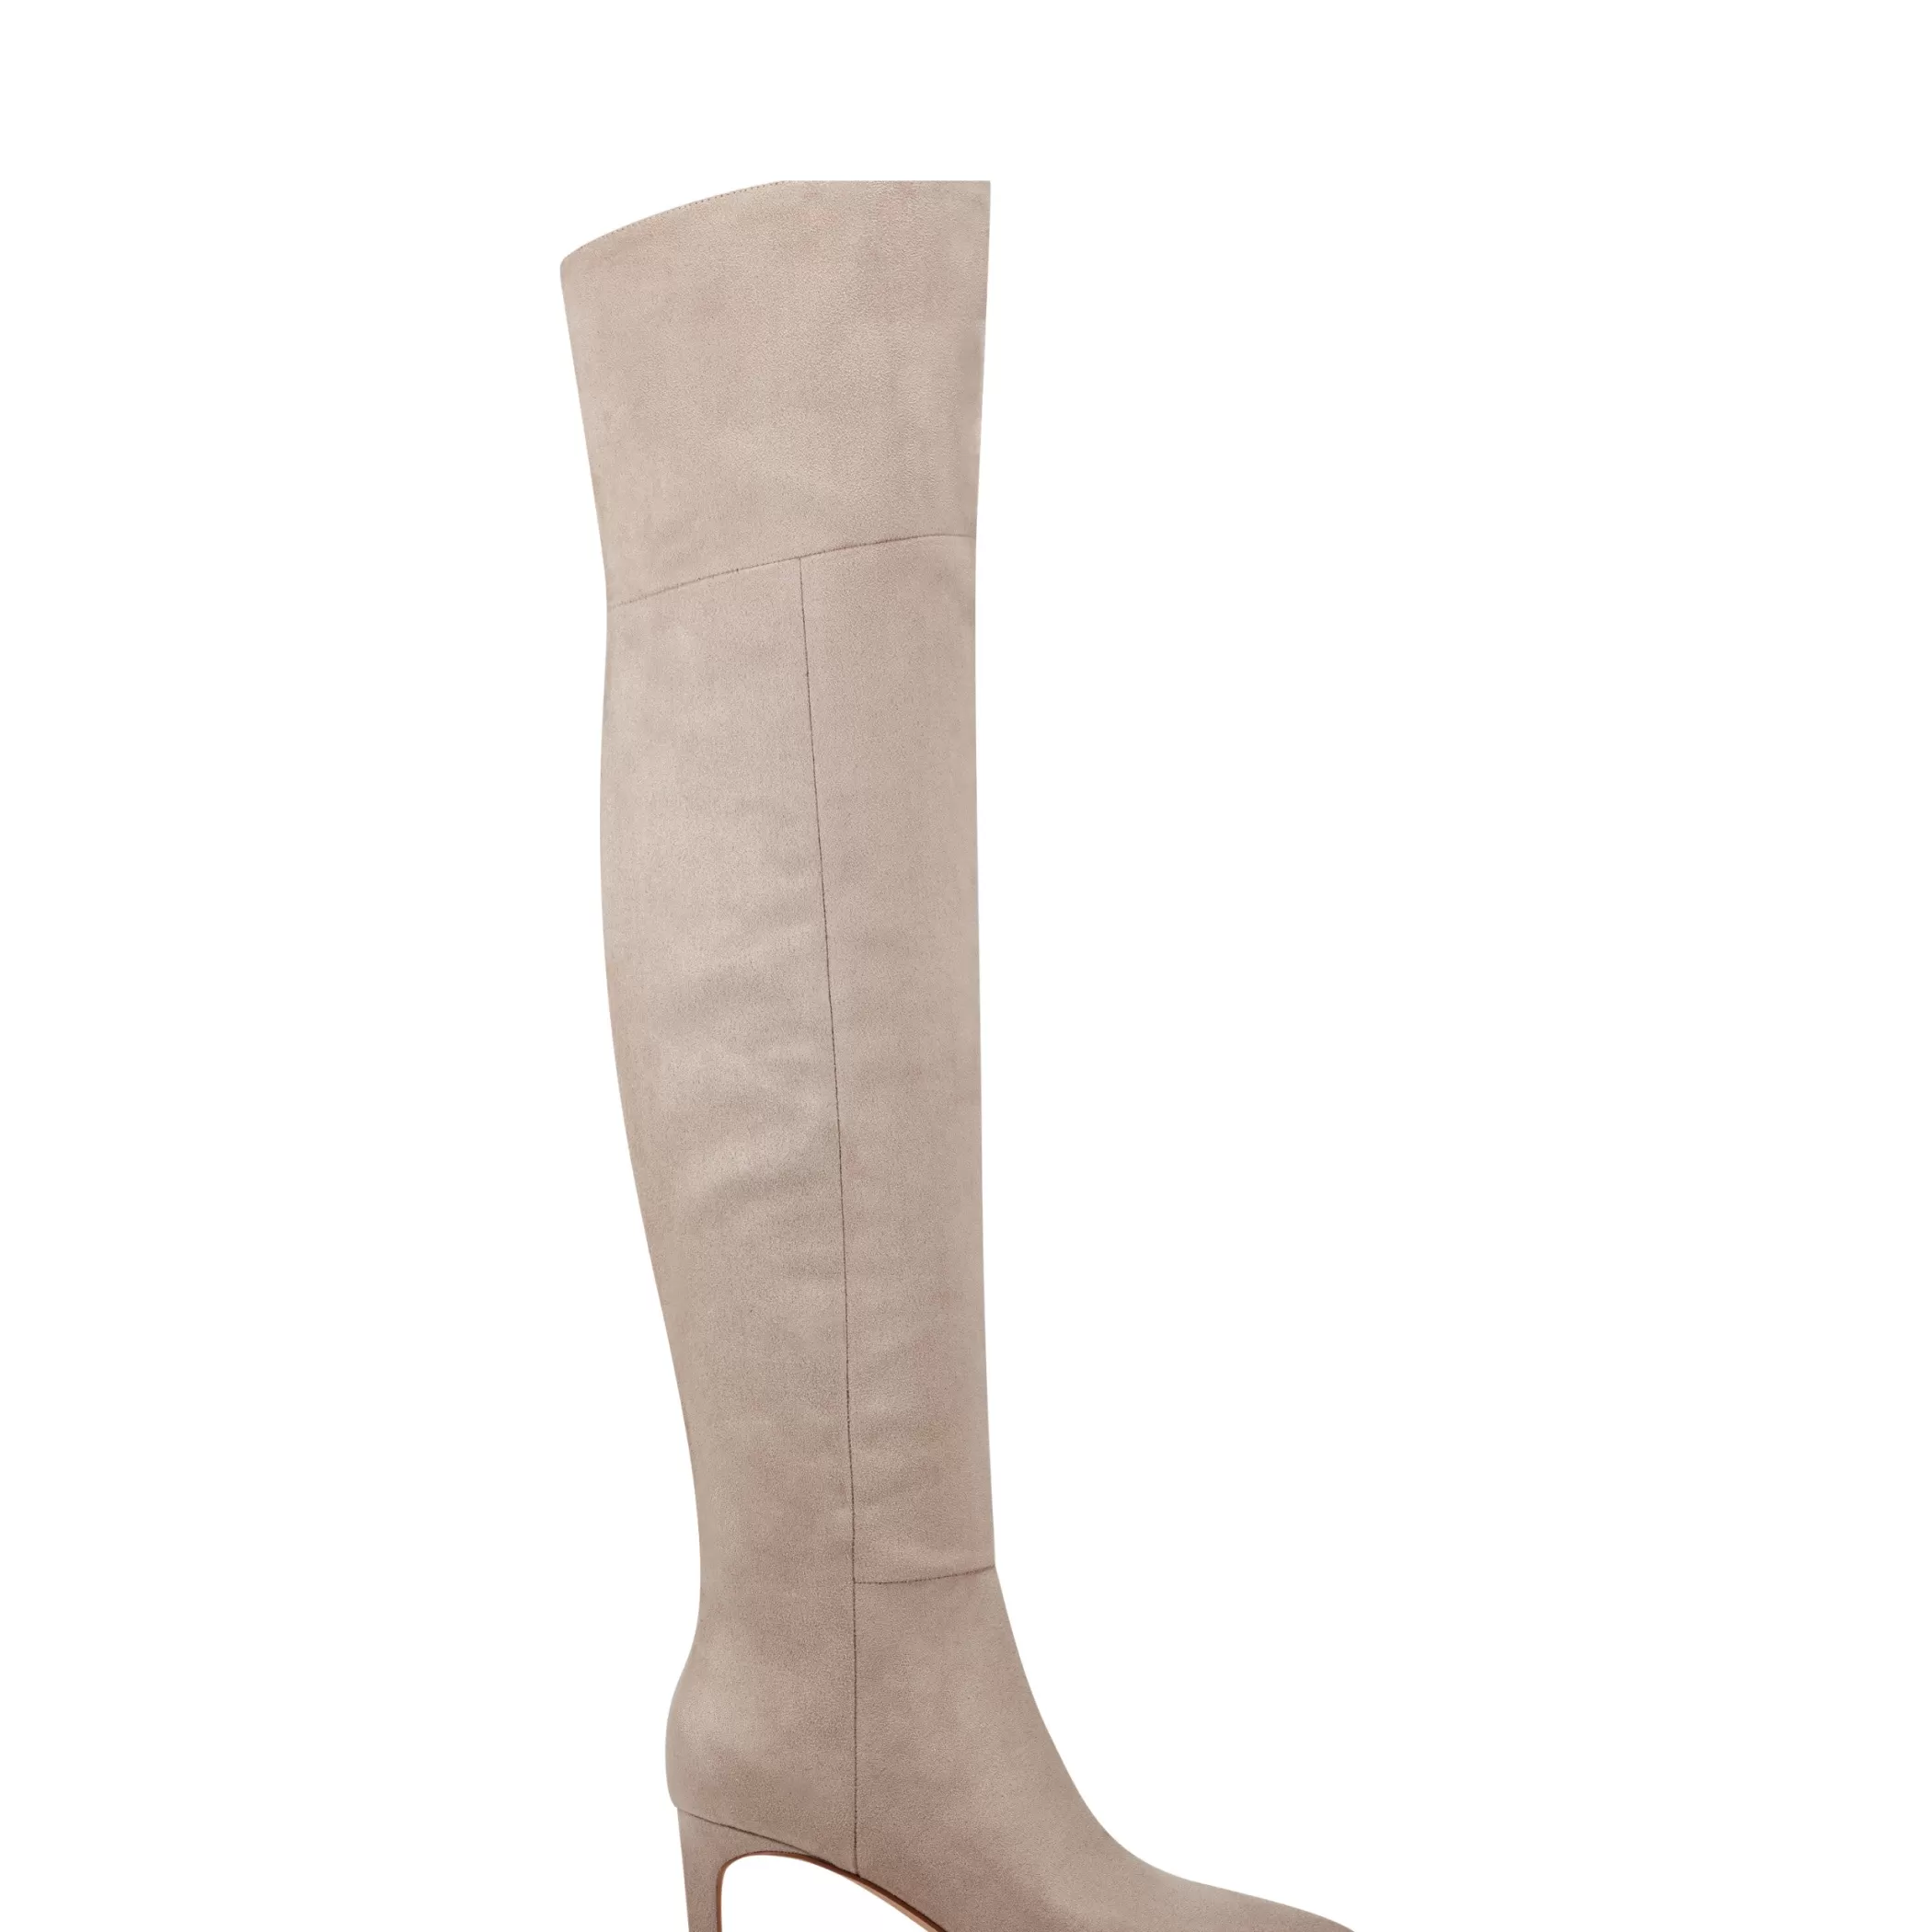 New Marc Fisher Qulie Pointy Toe Over The Knee Dress Boot Taupe